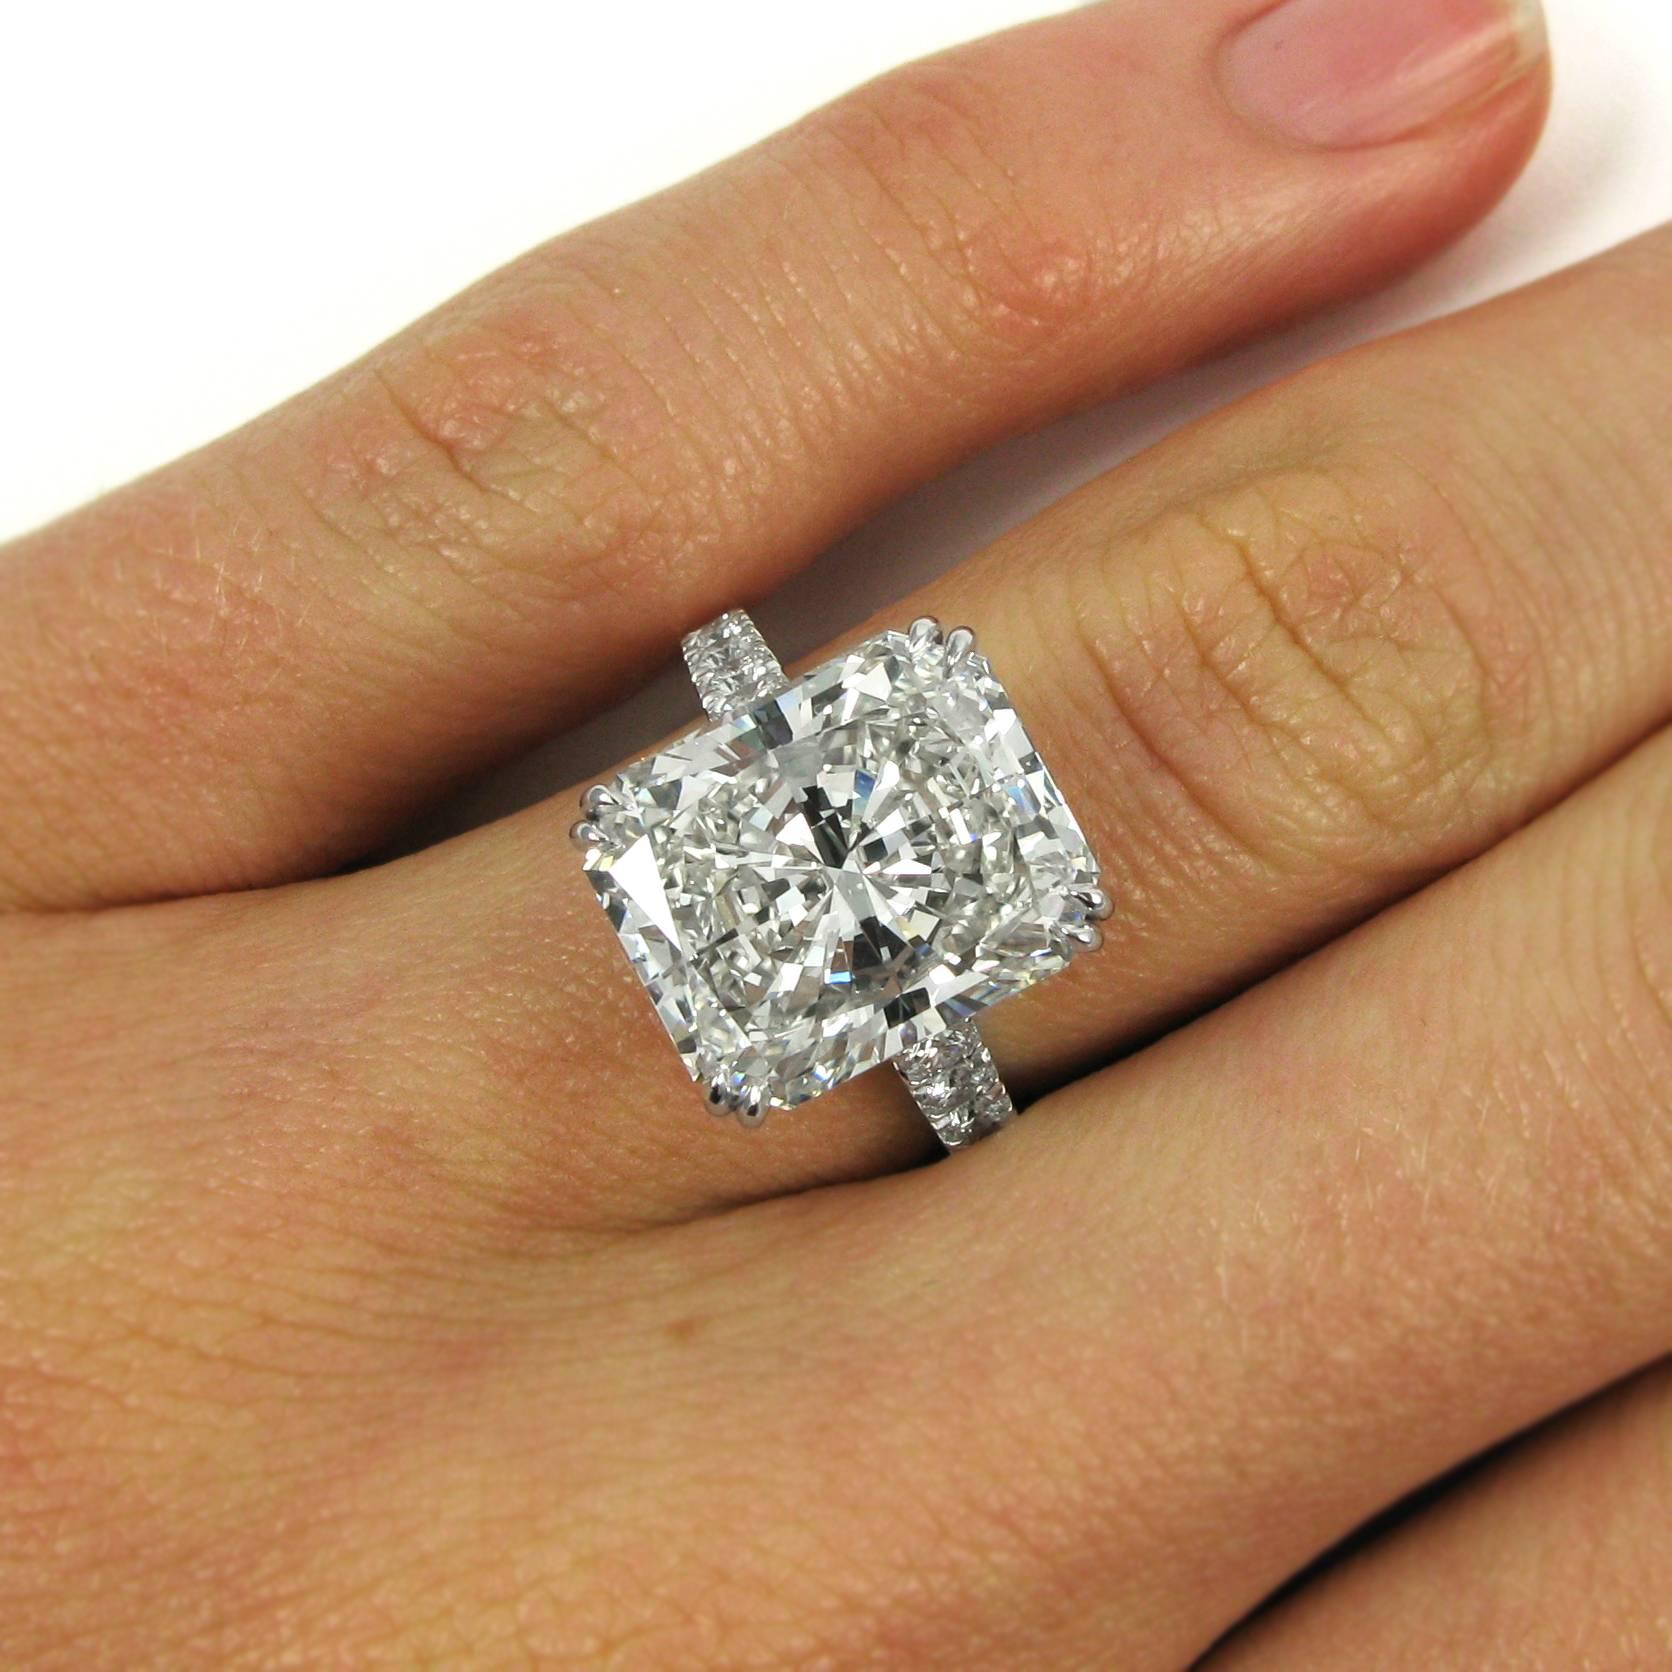 A scintillating and important ring centering on a 10.04 carat J. Birnbach radiant-cut diamond with J color and VS2 clarity. This beautifully-cut stone is set in a double-claw basket atop a cathedral ring shank set with 18 round brilliant-cut